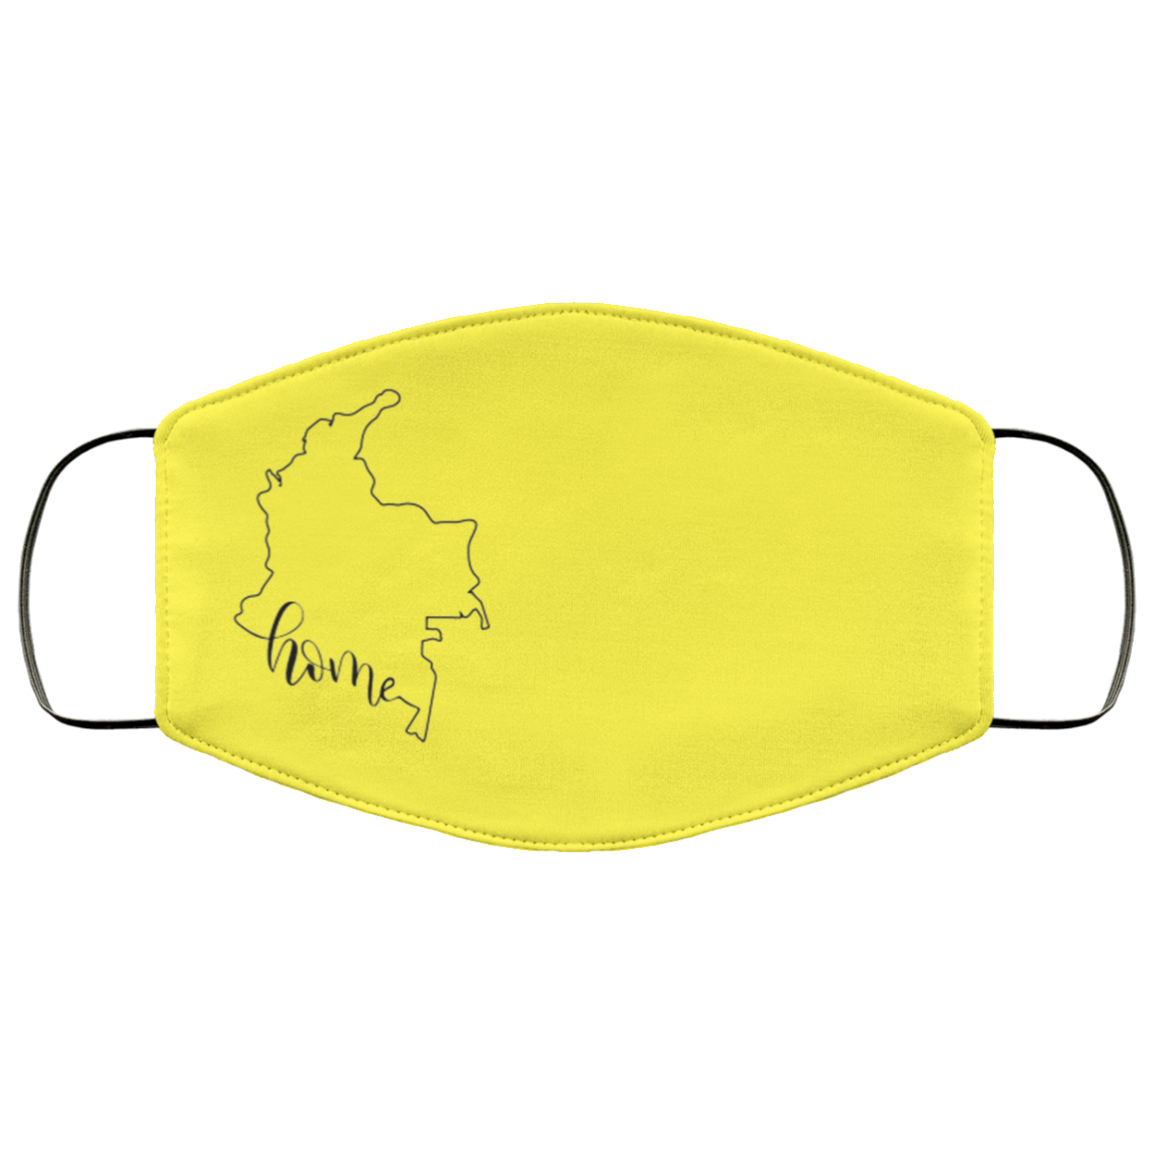 COLOMBIA (2 Colors) - Face Mask